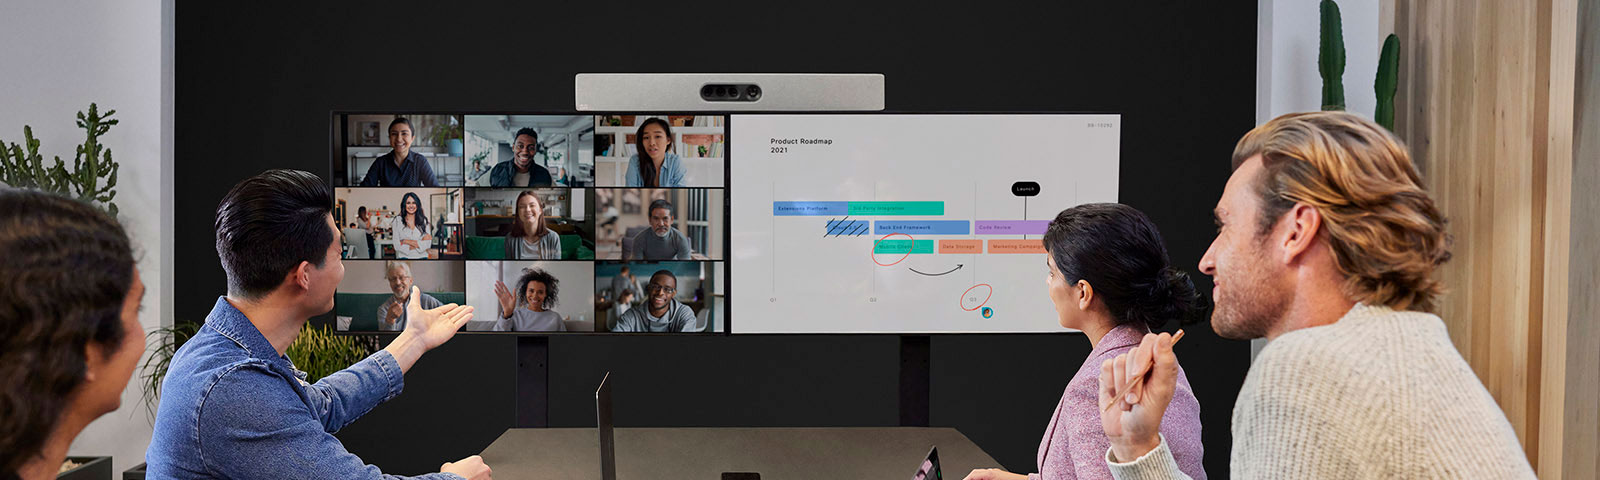 Transform your collaboration experience with Webex Devices